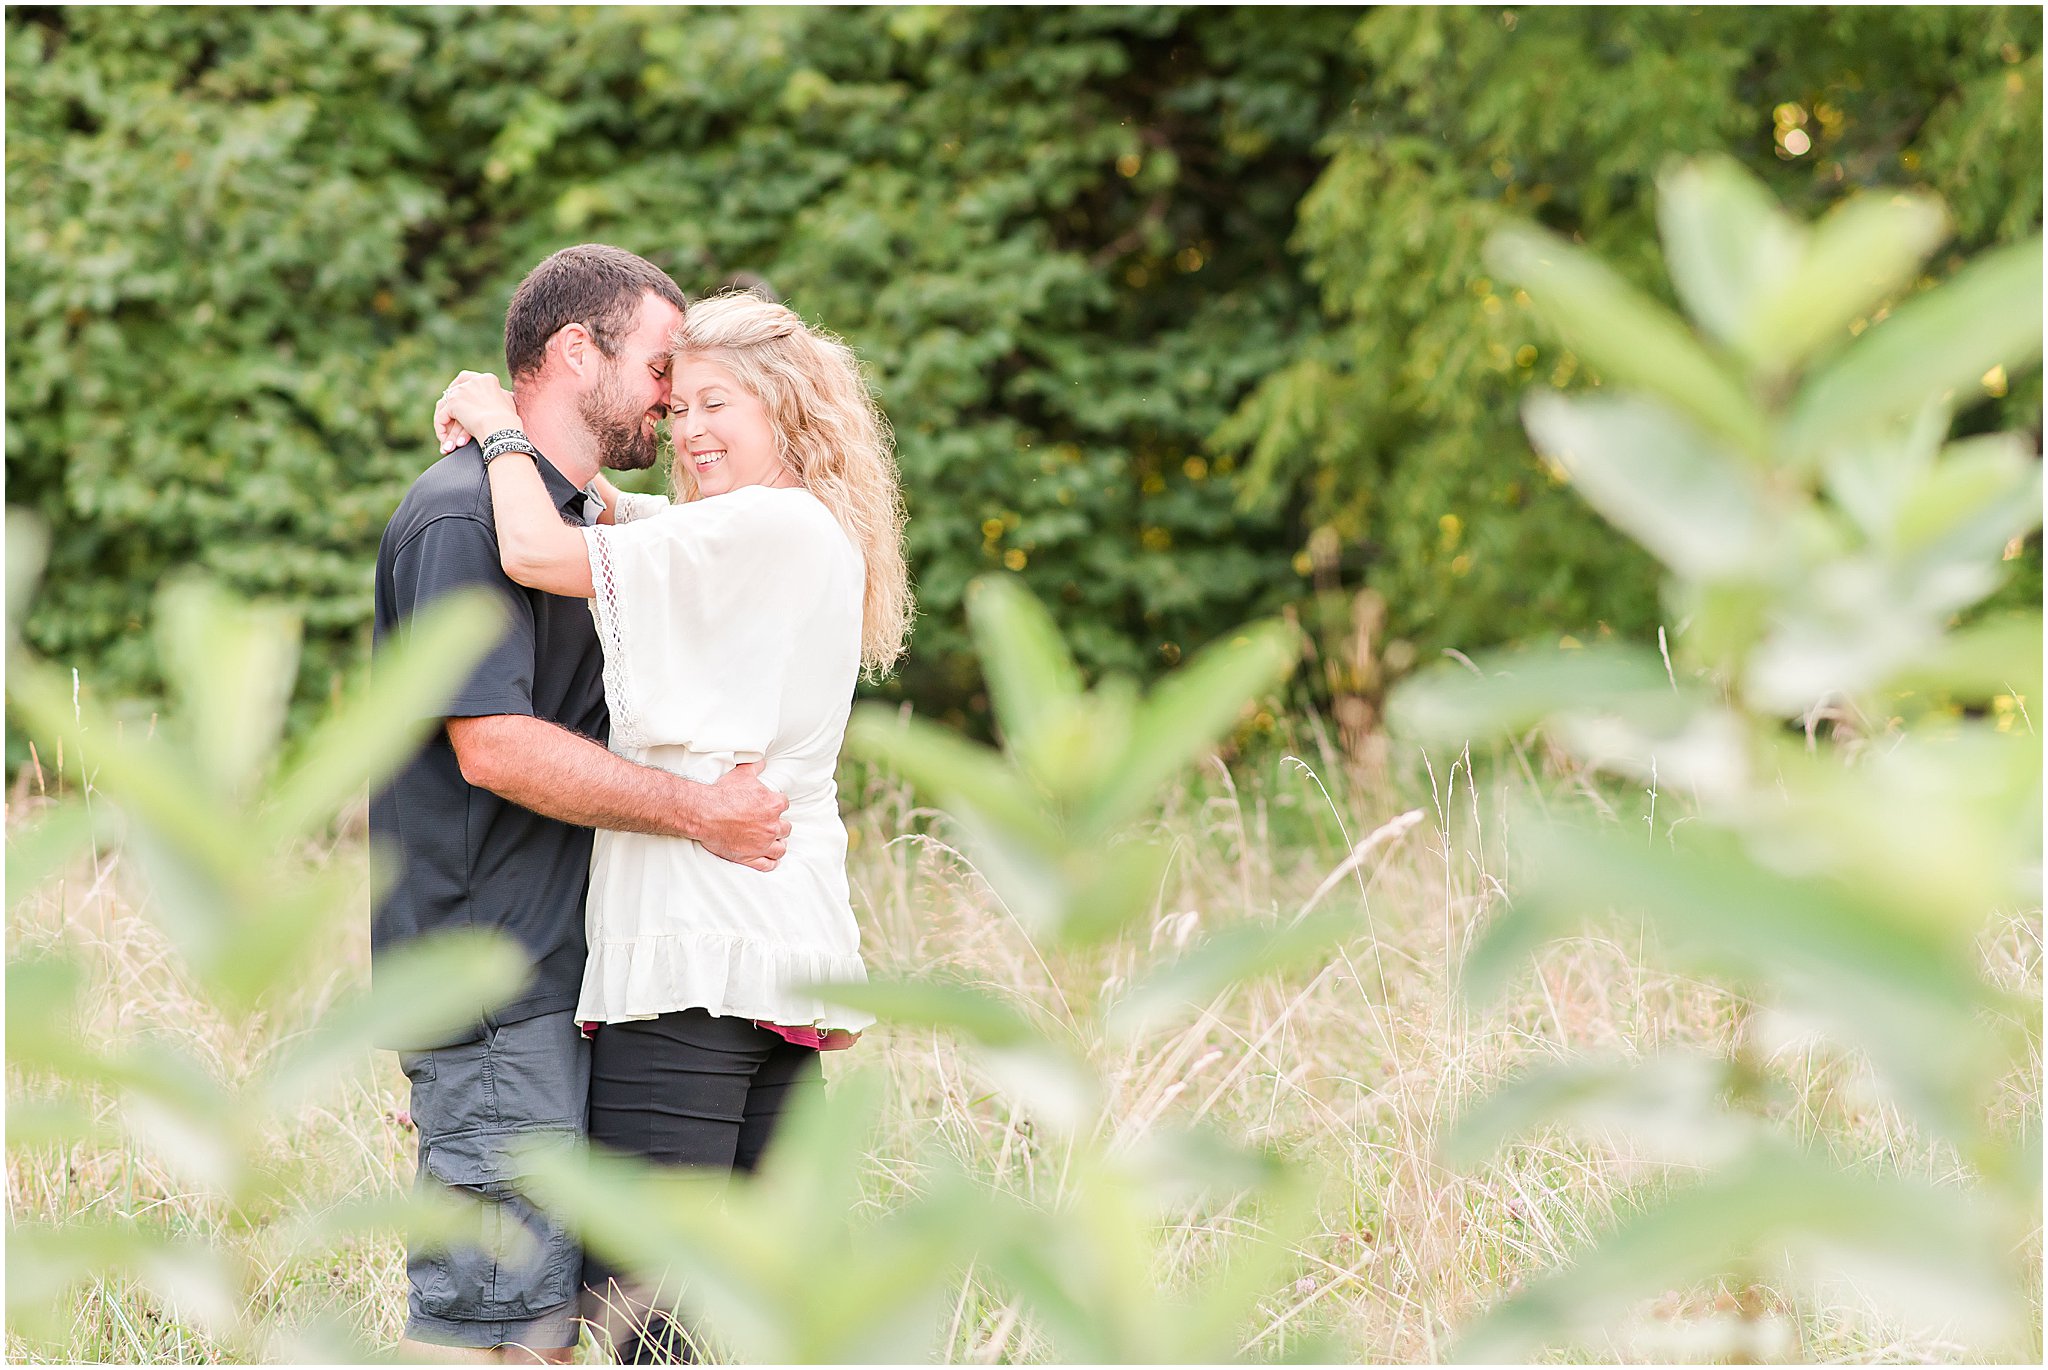 Bloomfield Indiana engagement session guy and girl standing in field, girl smiling over her shoulder